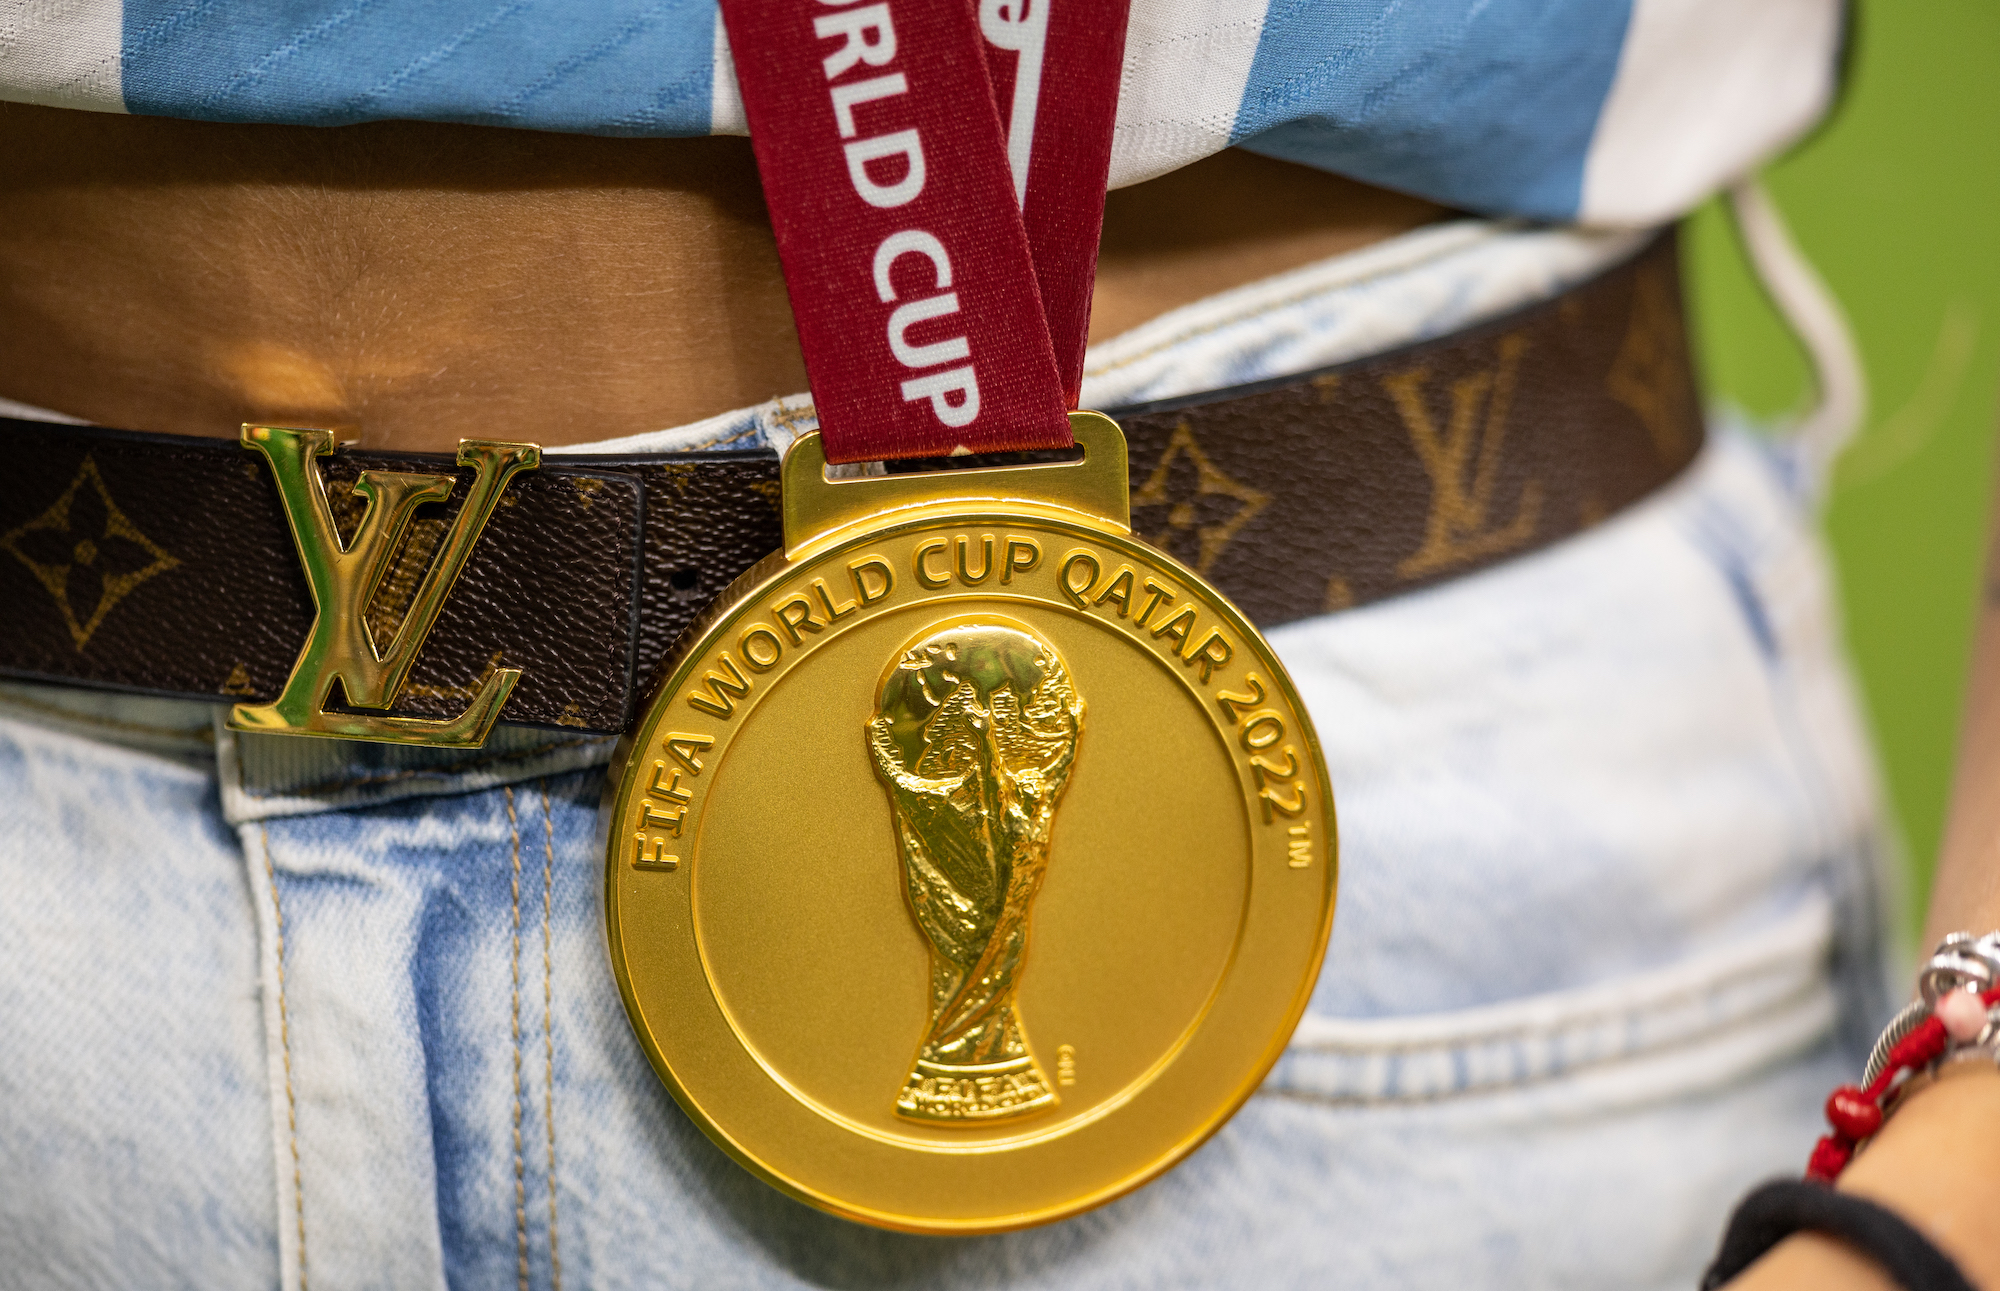 A closeup of the Qatar World Cup gold medal